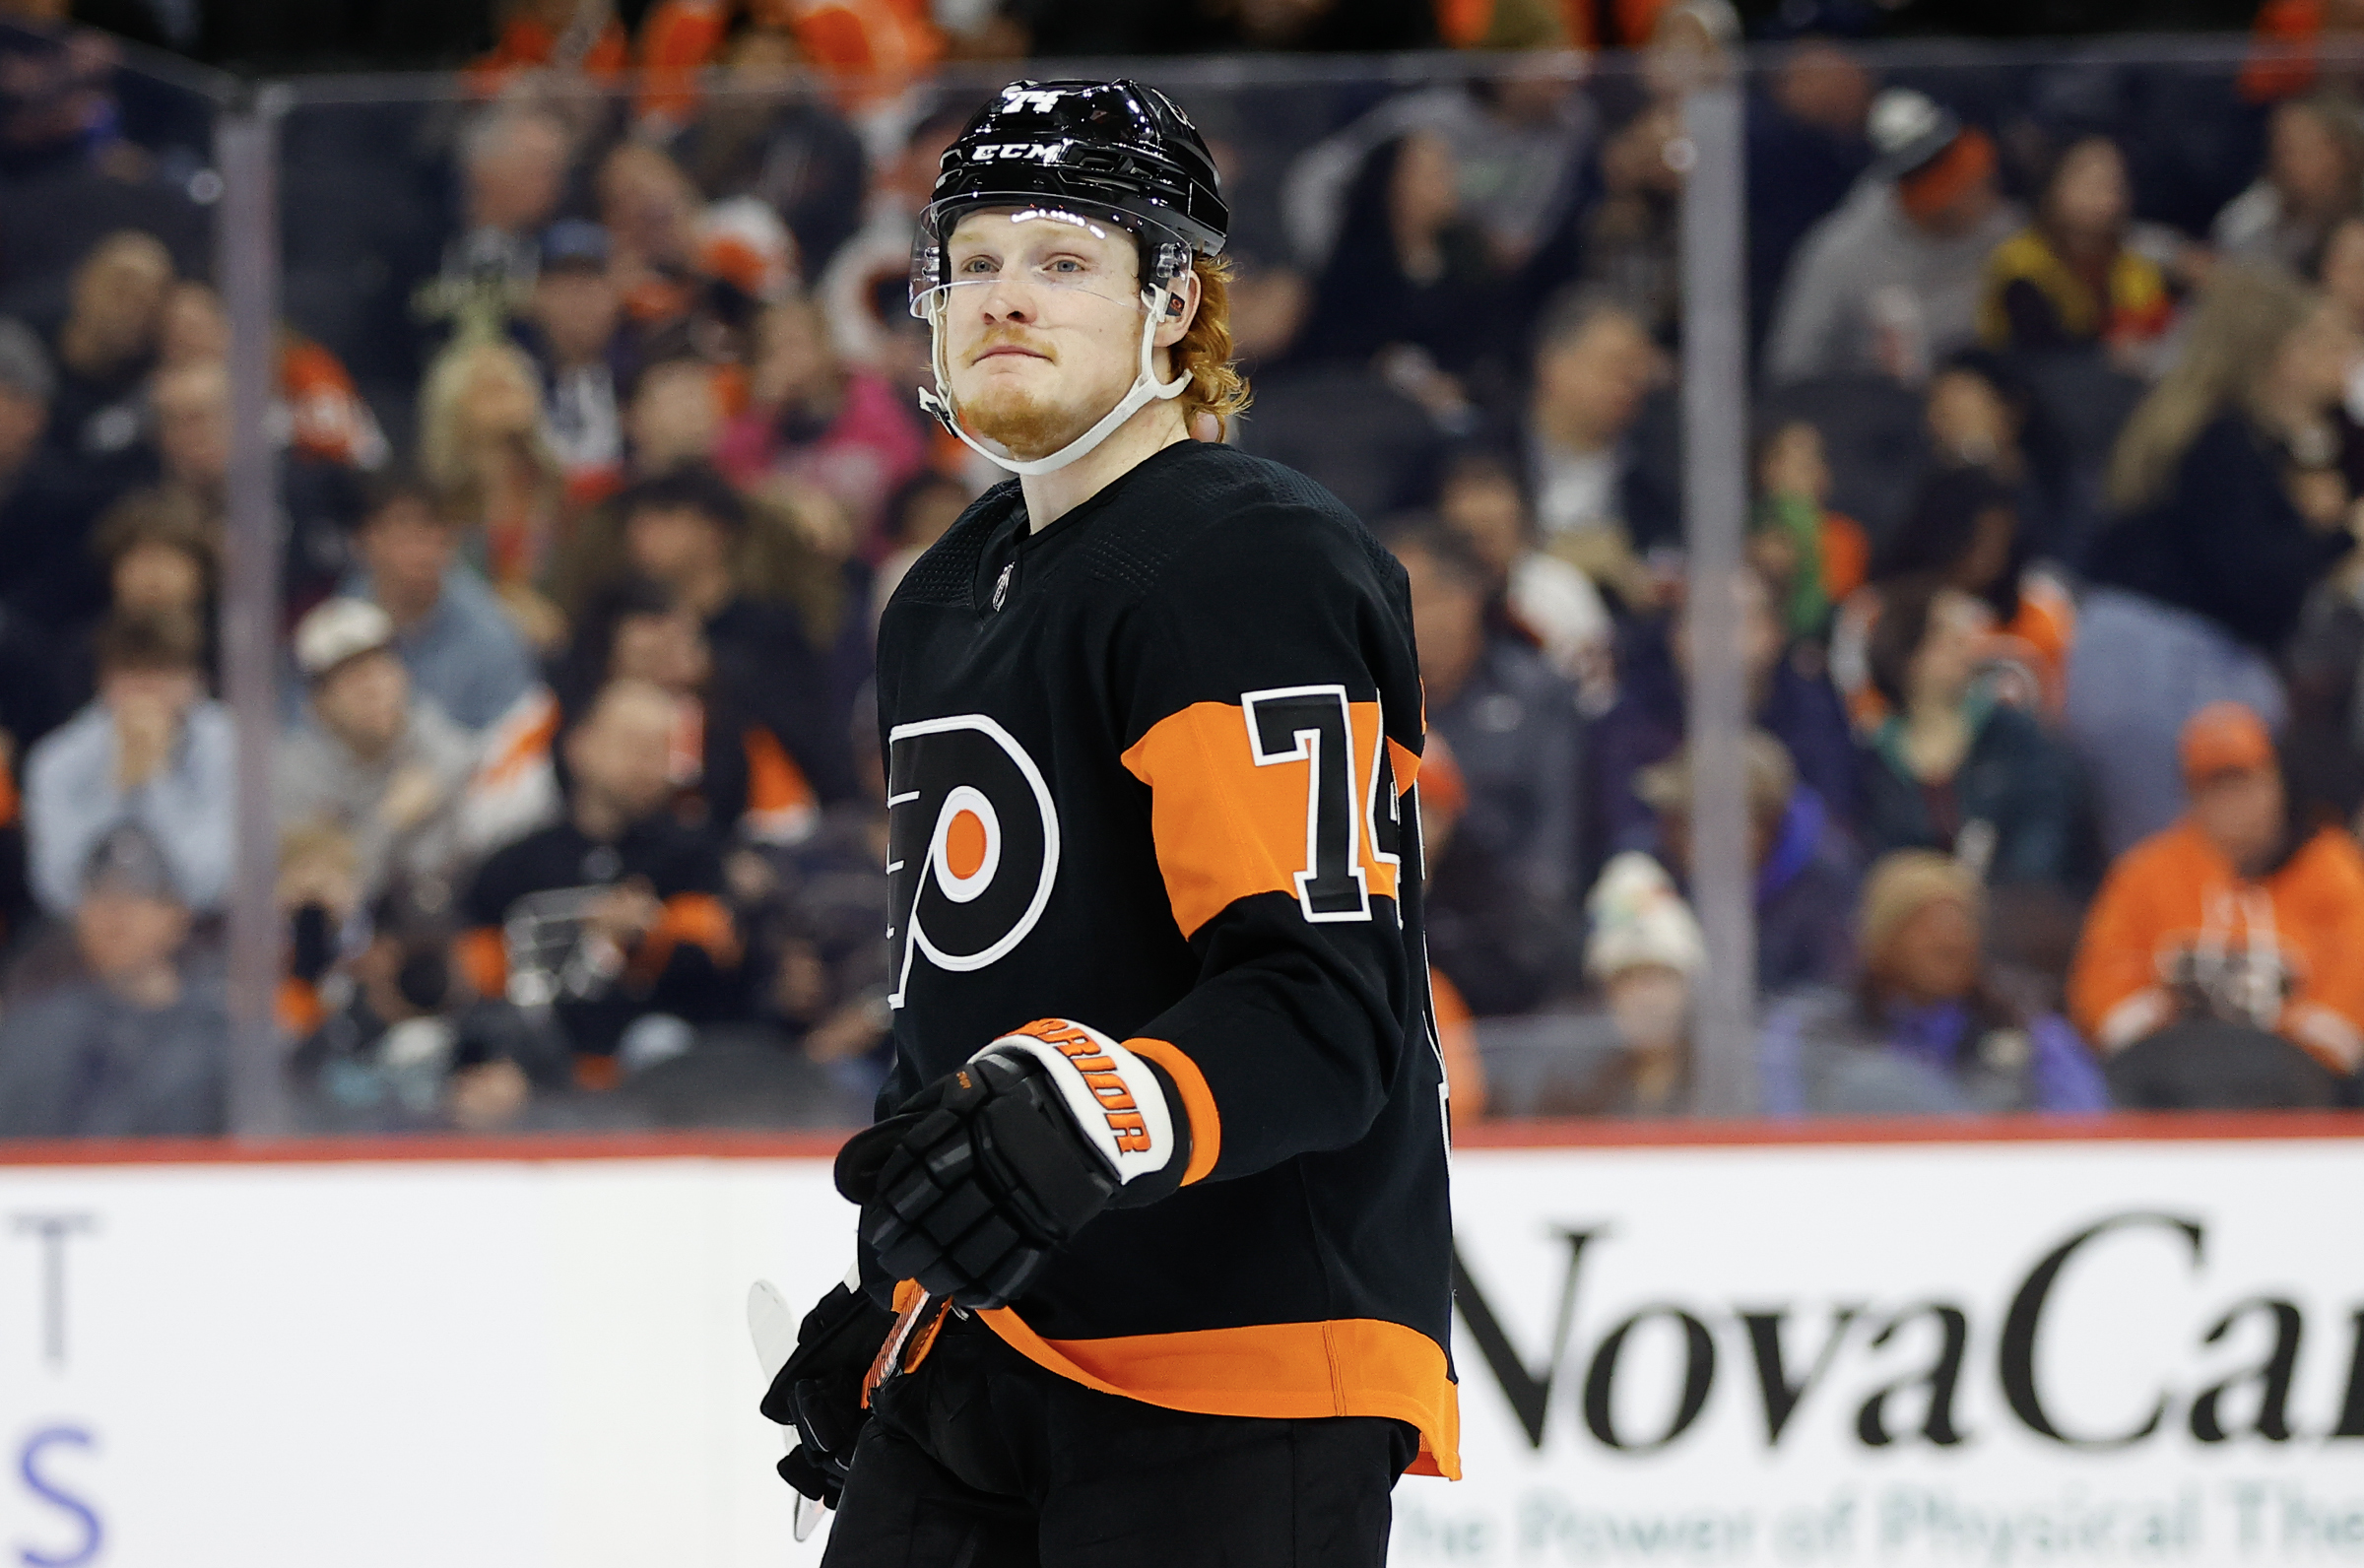 Could Flyers move Owen Tippett to left wing due to logjam on the